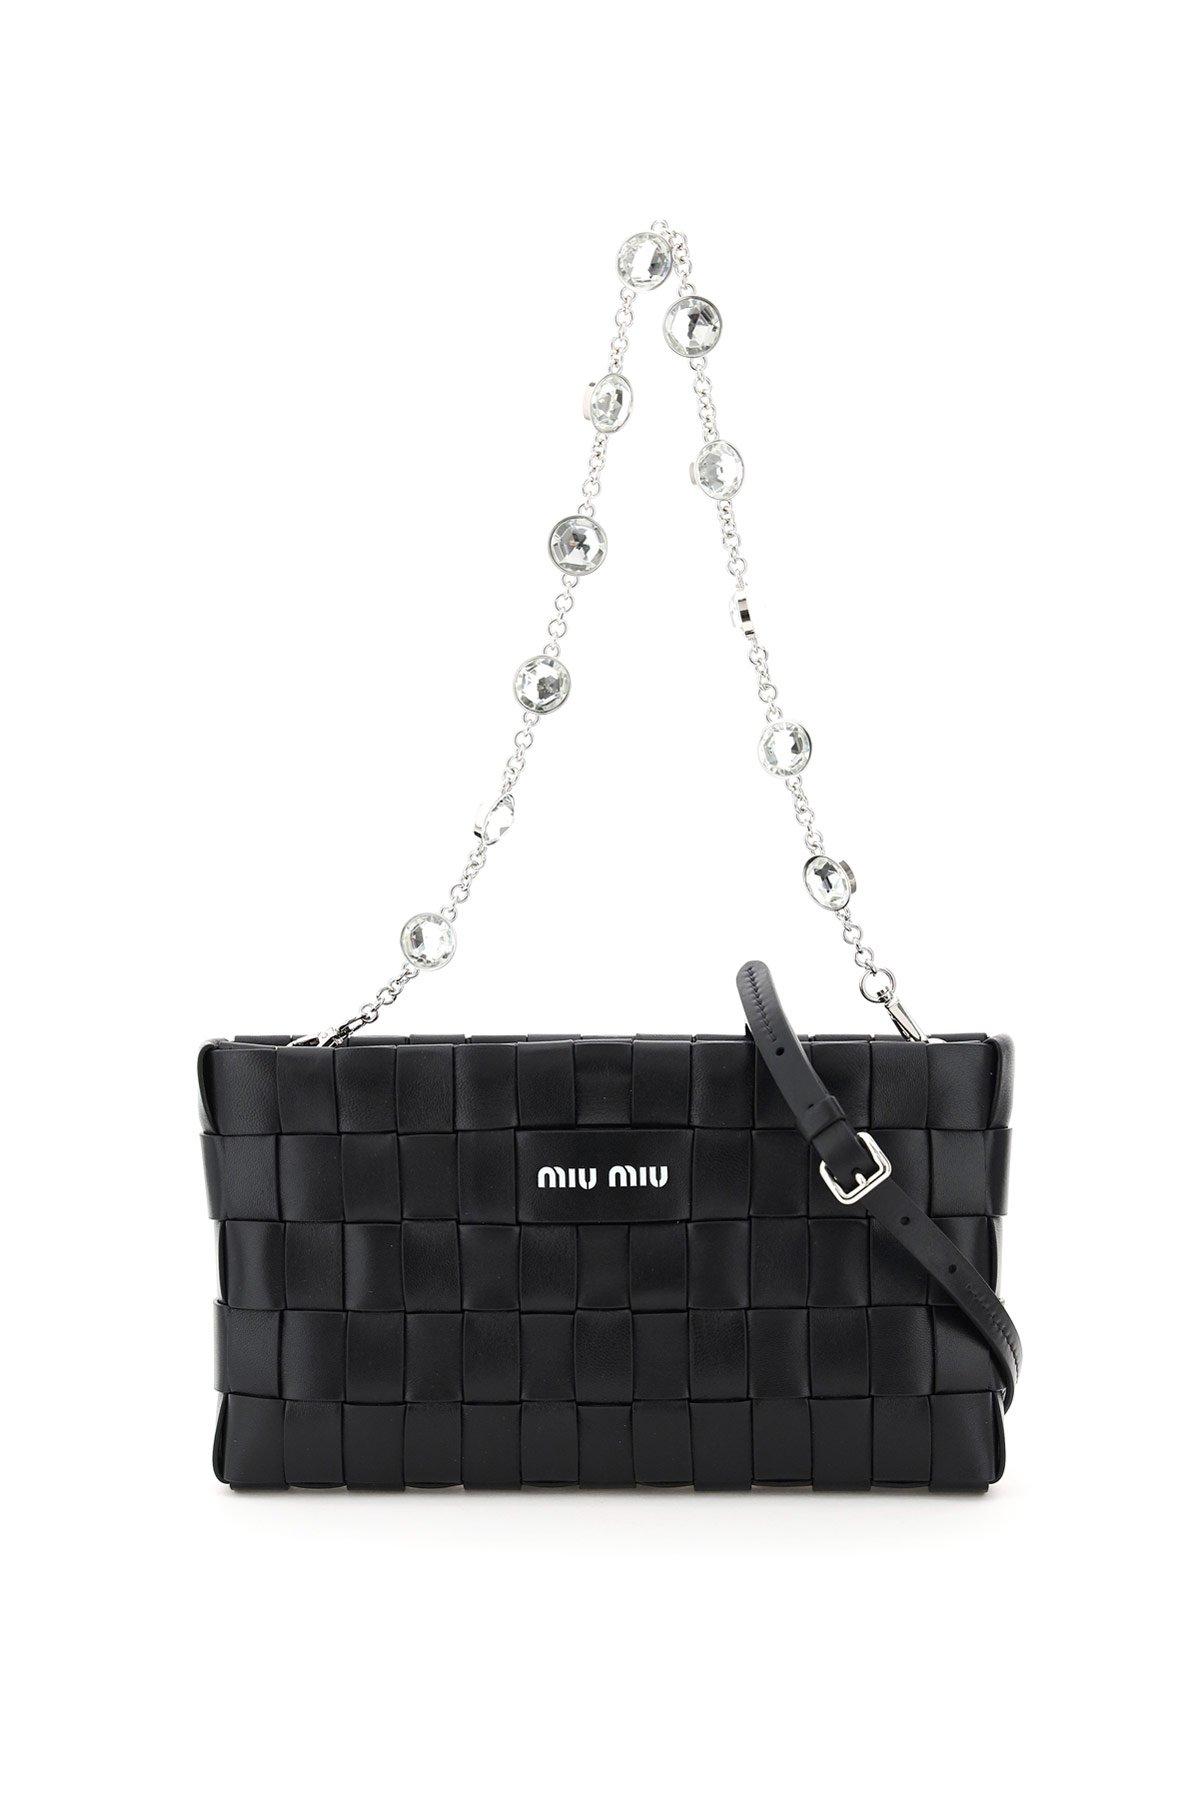 Miu Miu Woven Clutch With Crystal Chain in Black | Lyst